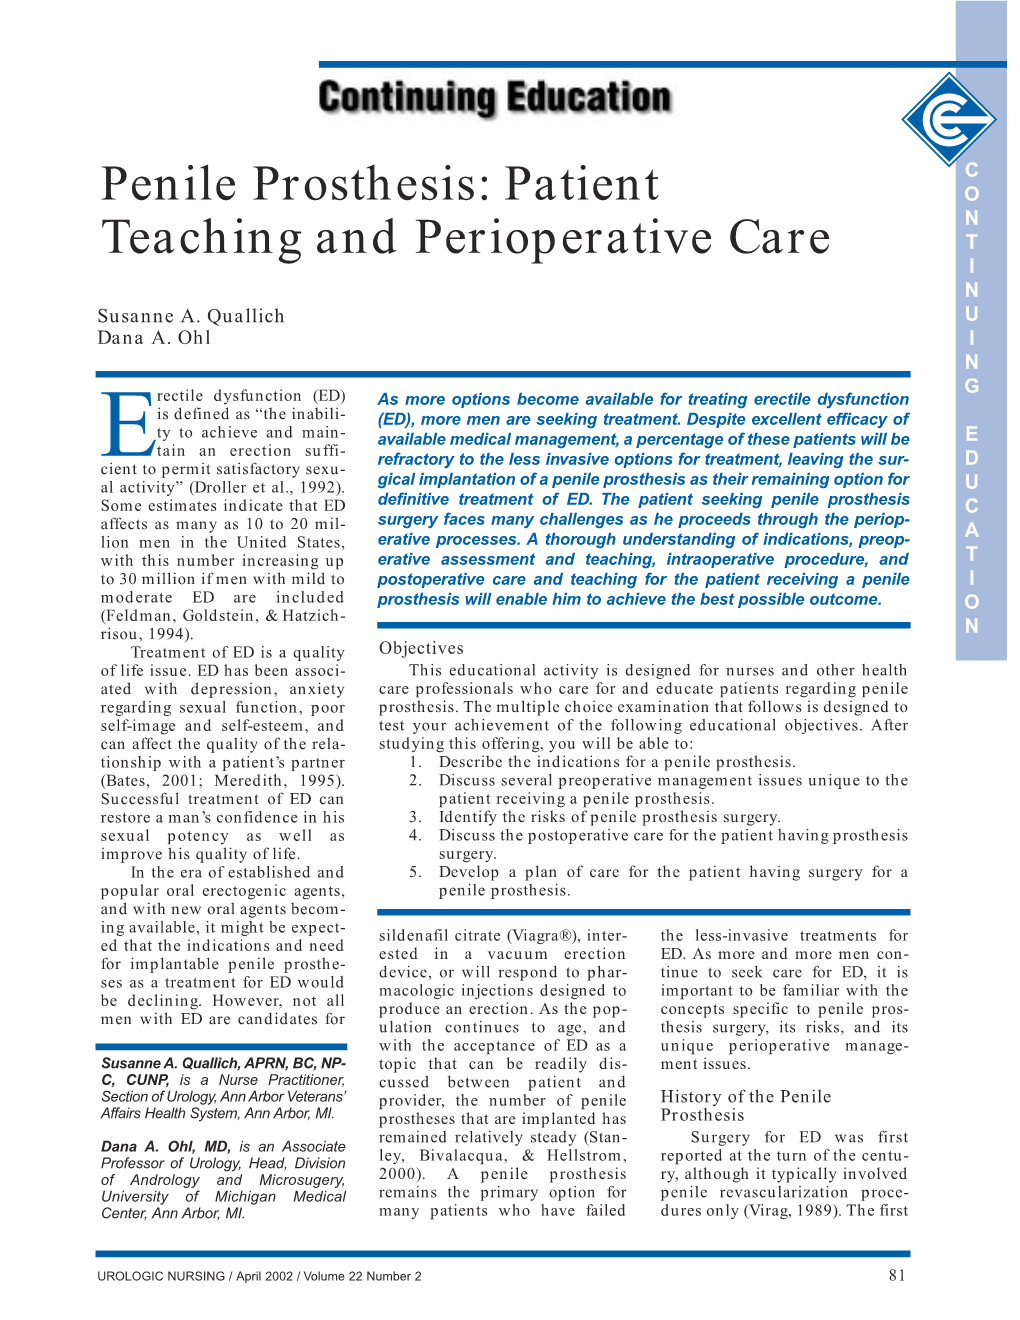 Penile Prosthesis: Patient Teaching and Perioperative Care